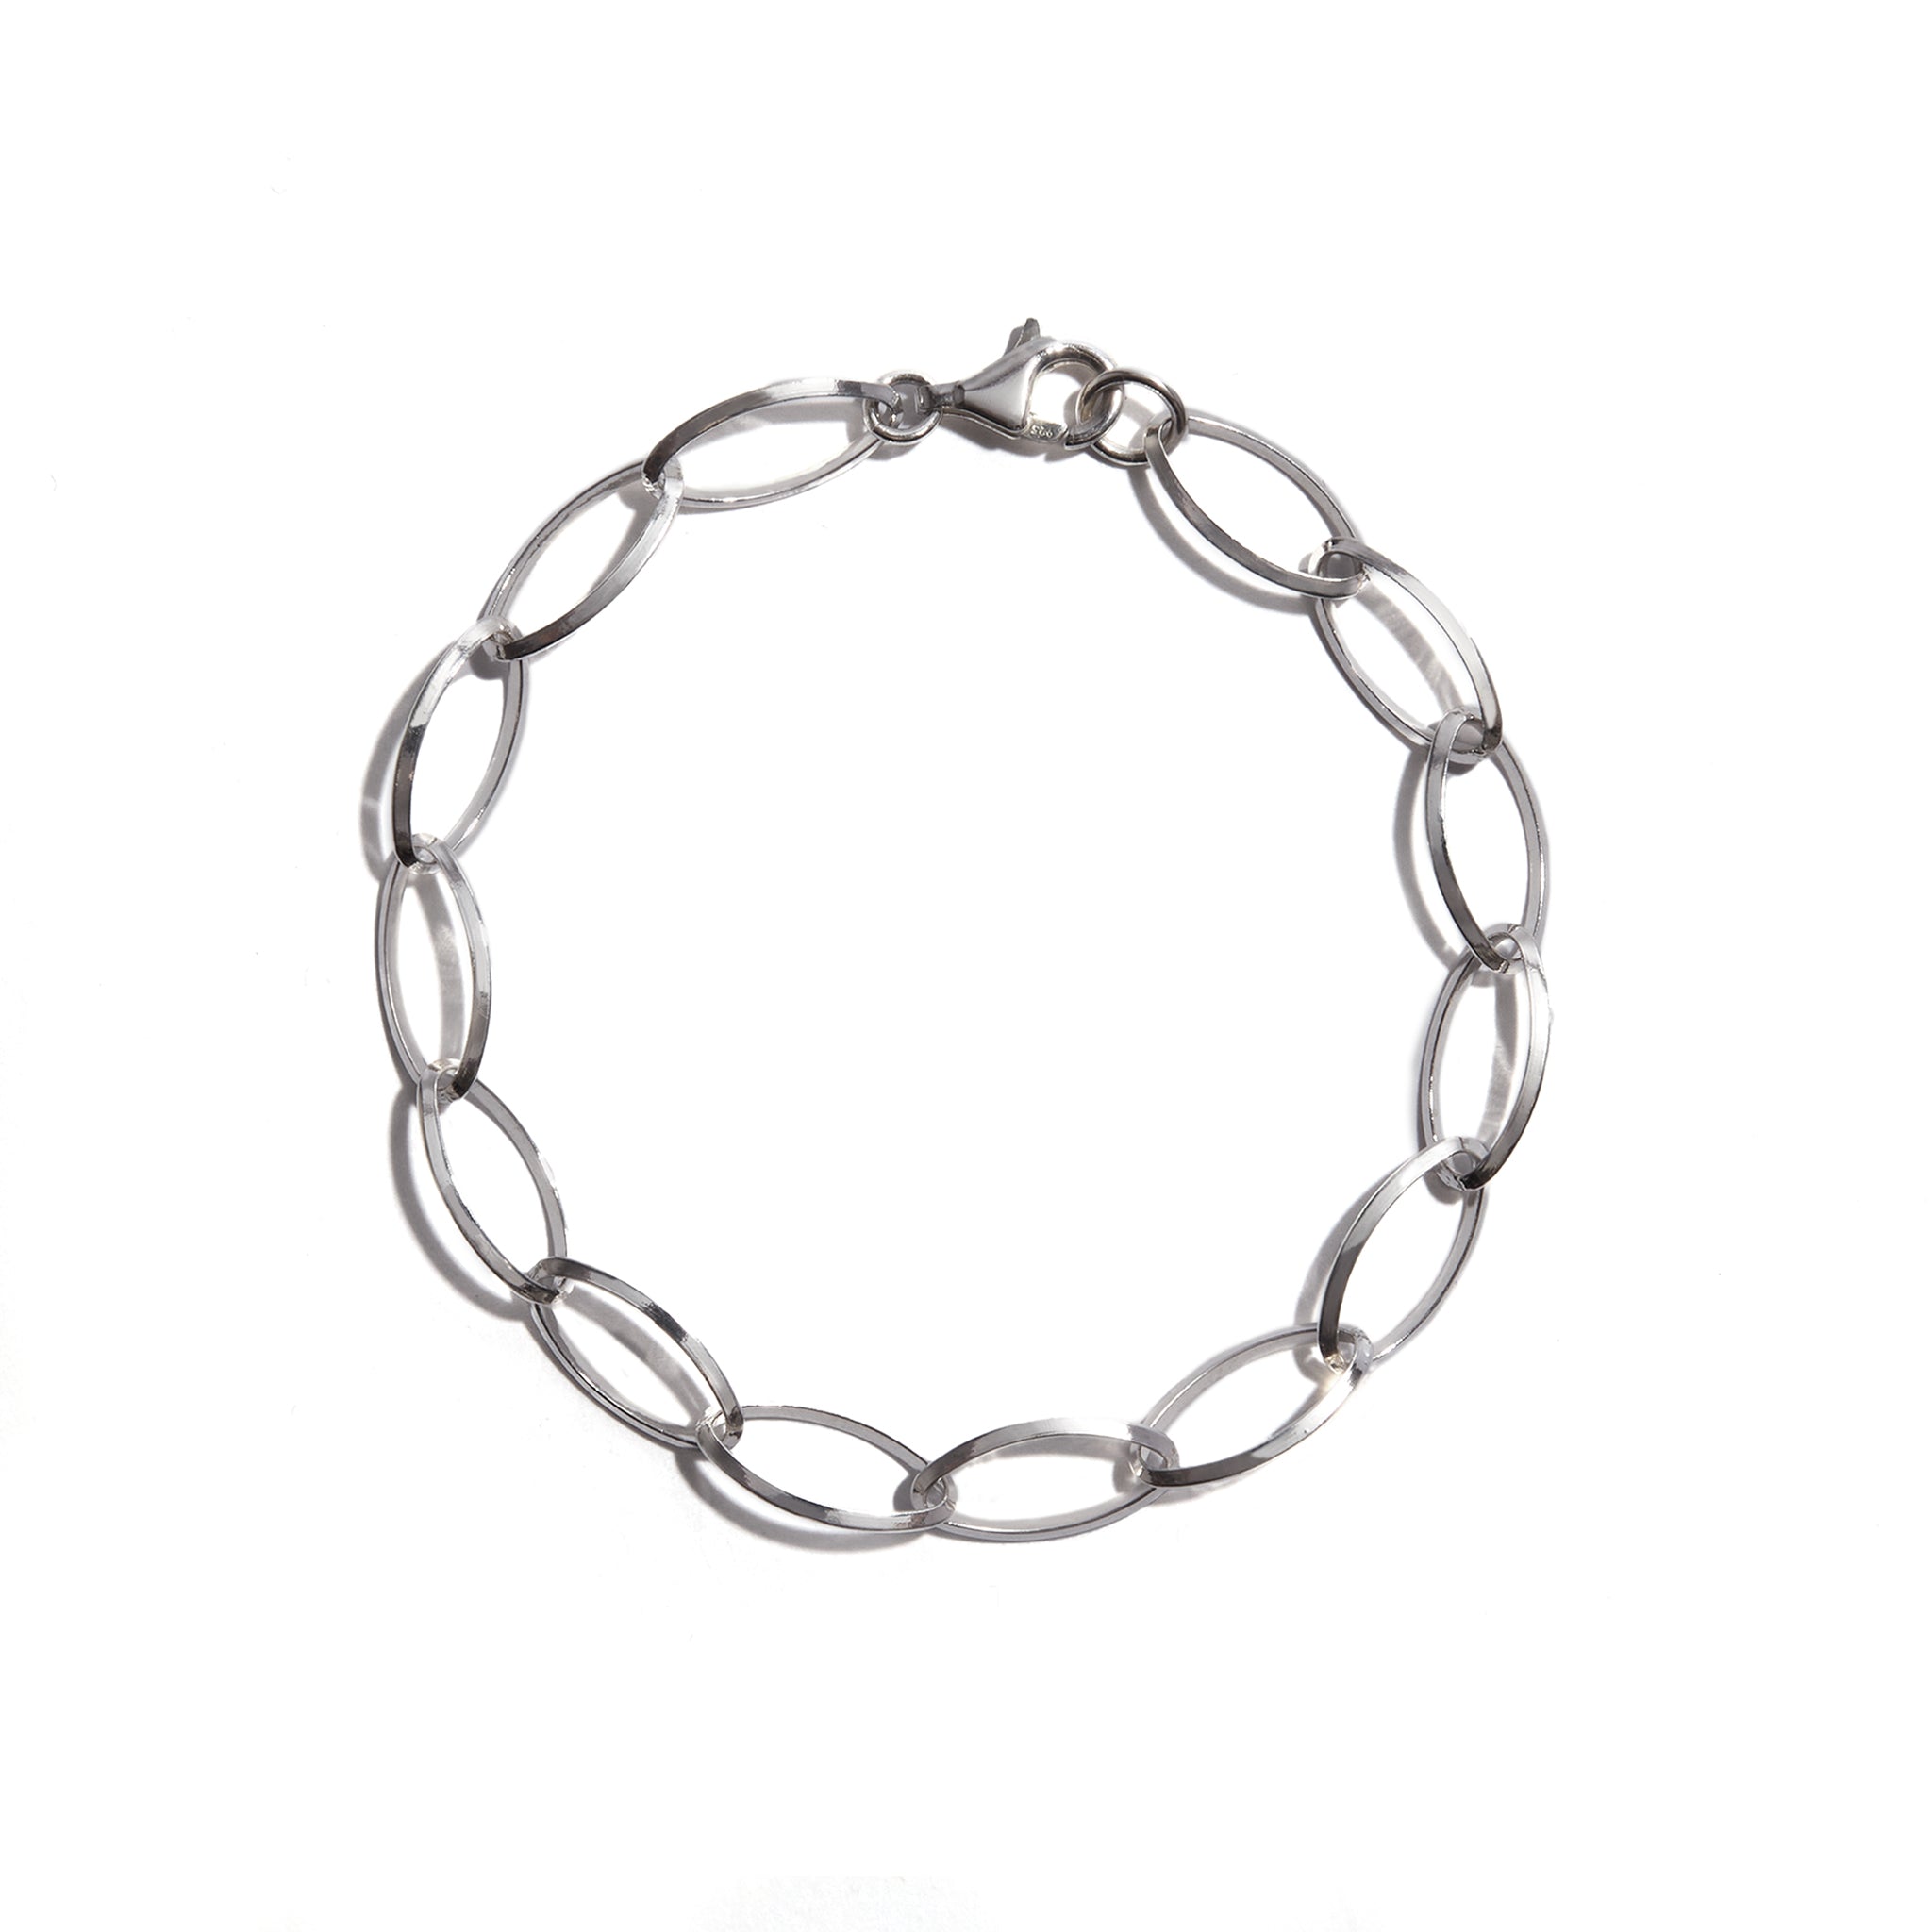 A charming silver bracelet with delicate open oval links crafted from sterling silver, perfect for adding elegance to any wrist.